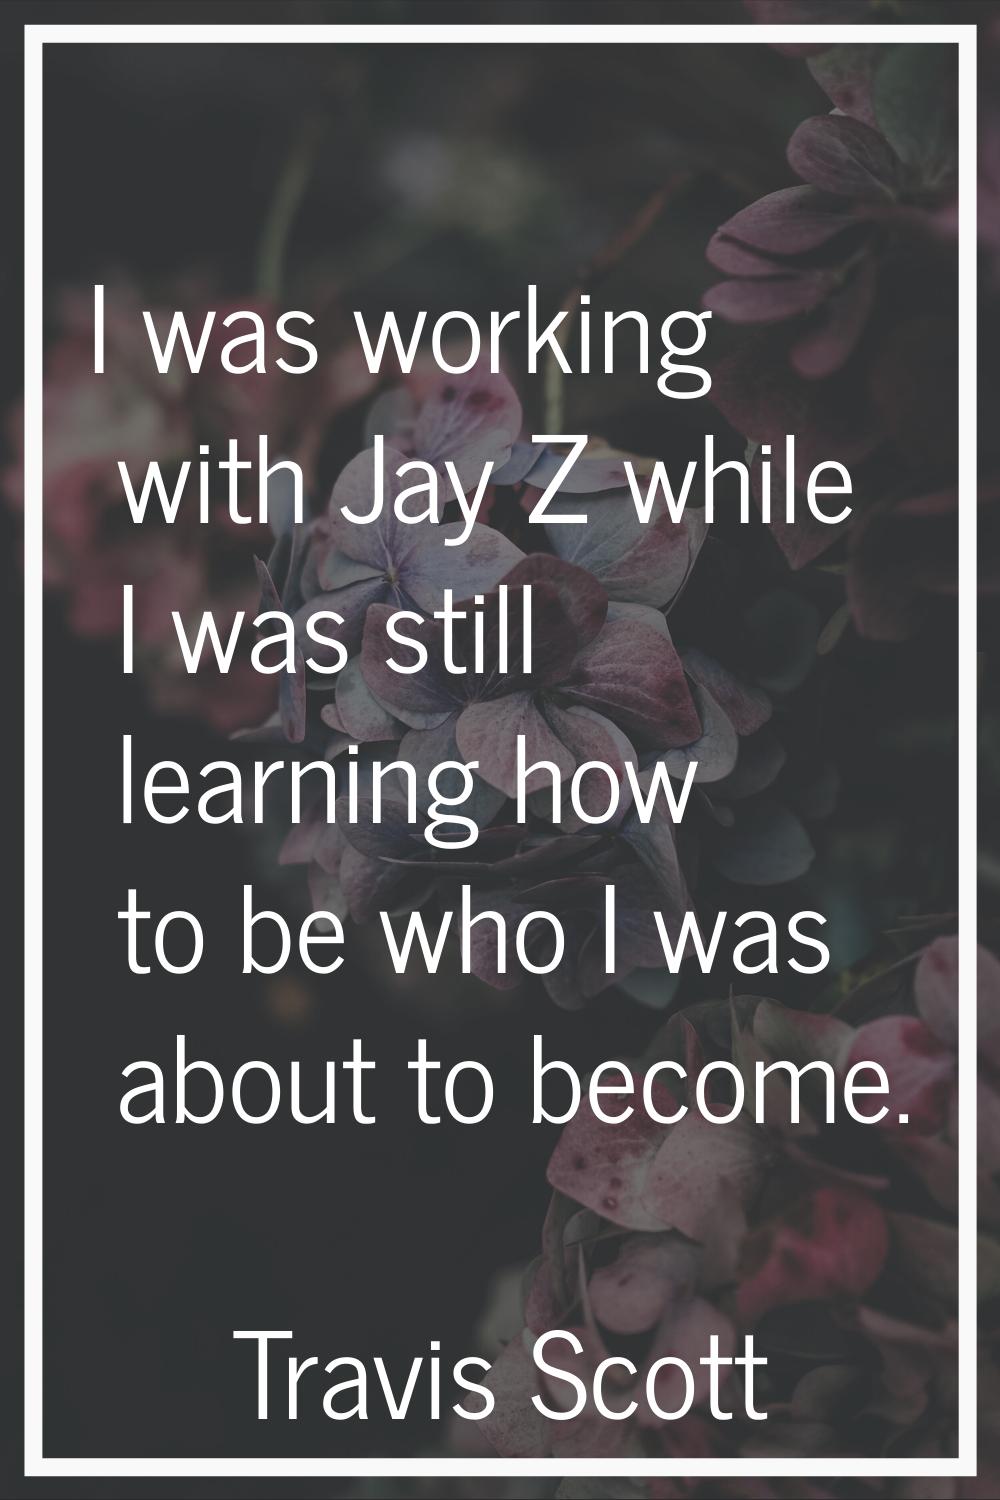 I was working with Jay Z while I was still learning how to be who I was about to become.